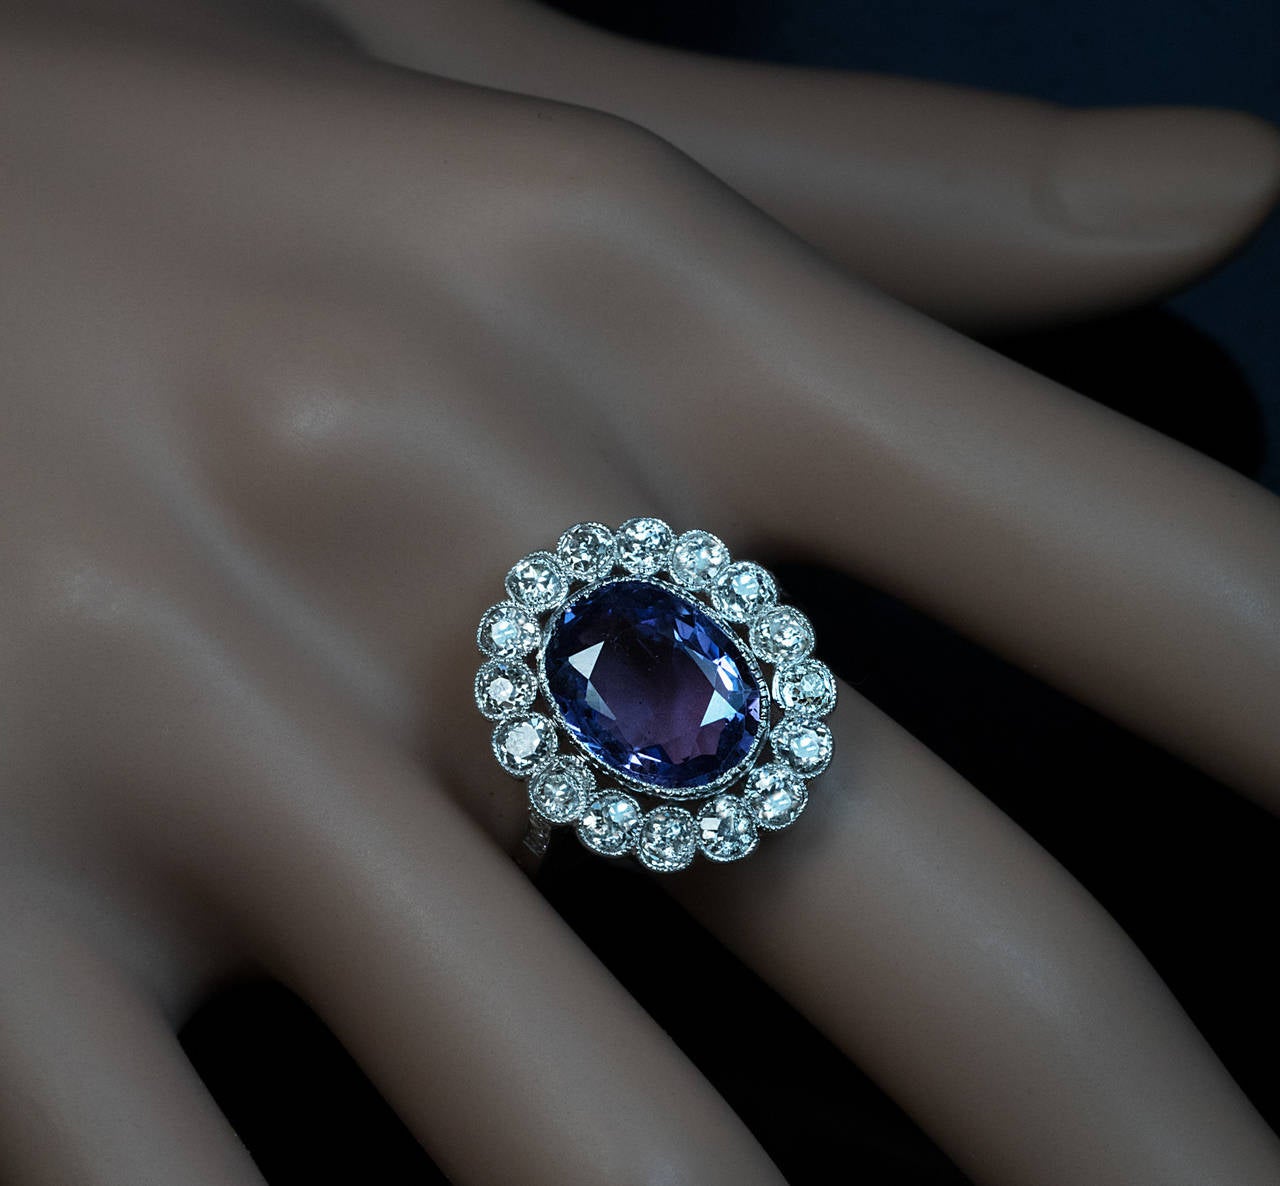 The milgran platinum ring features a 5.41 ct natural sapphire with an unusually bluish-purple color.

The sapphire is framed by 16 sparkling old European cut diamonds (I-J color, VS2-SI2 clarity).

The shoulders of the ring are set with six old